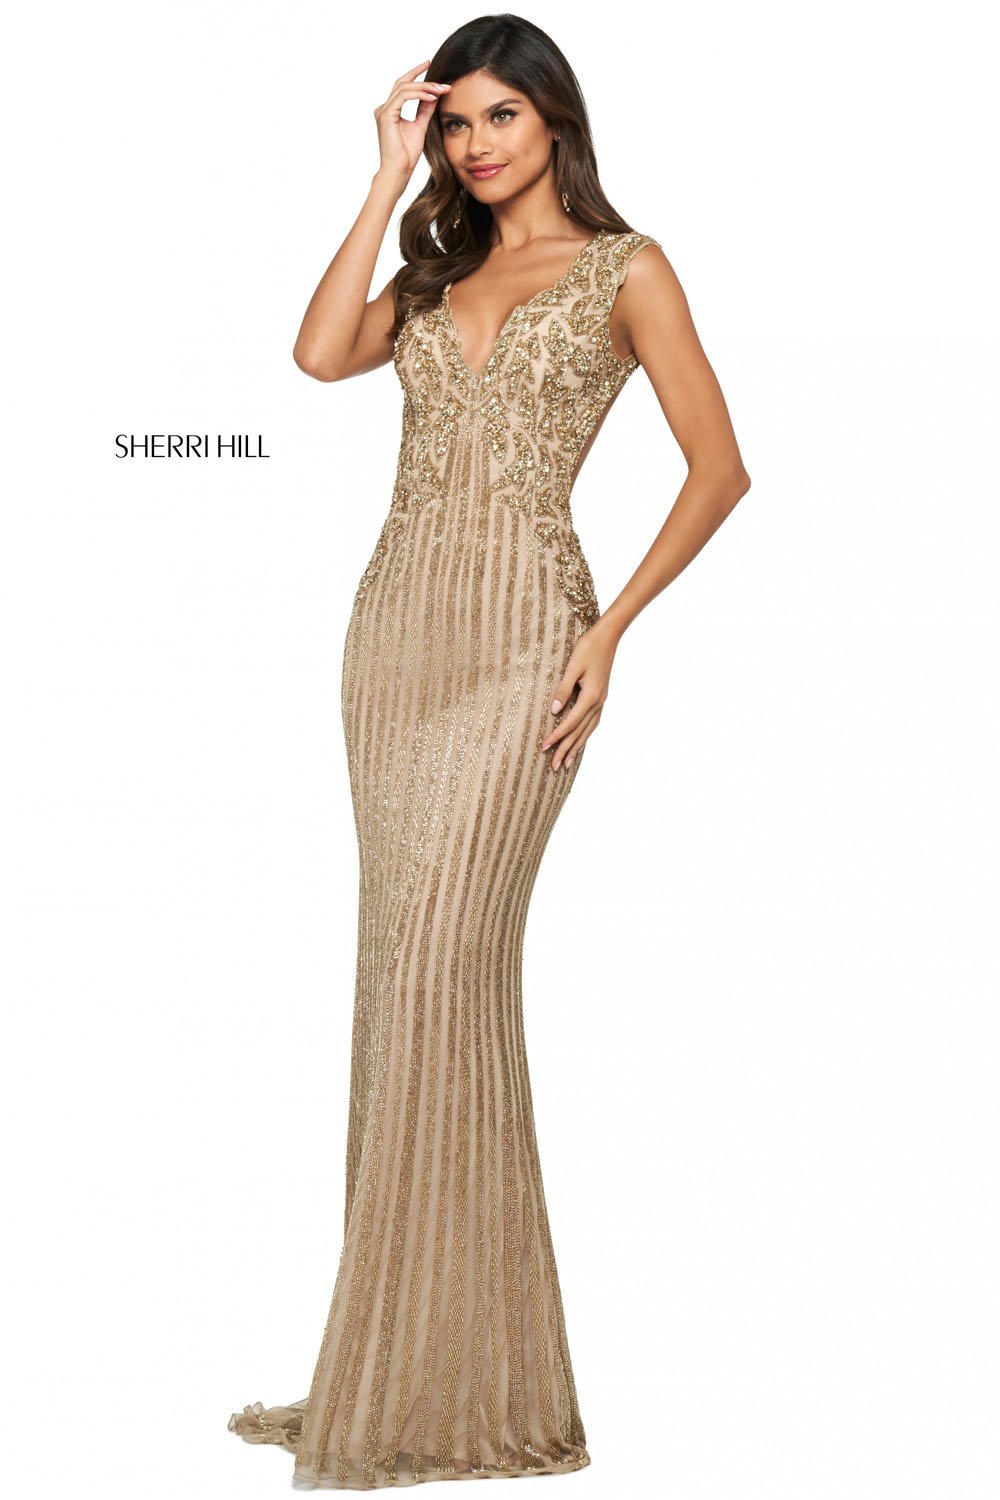 Sherri Hill 53915 dress images in these colors: Nude Gold, Ivory Silver.